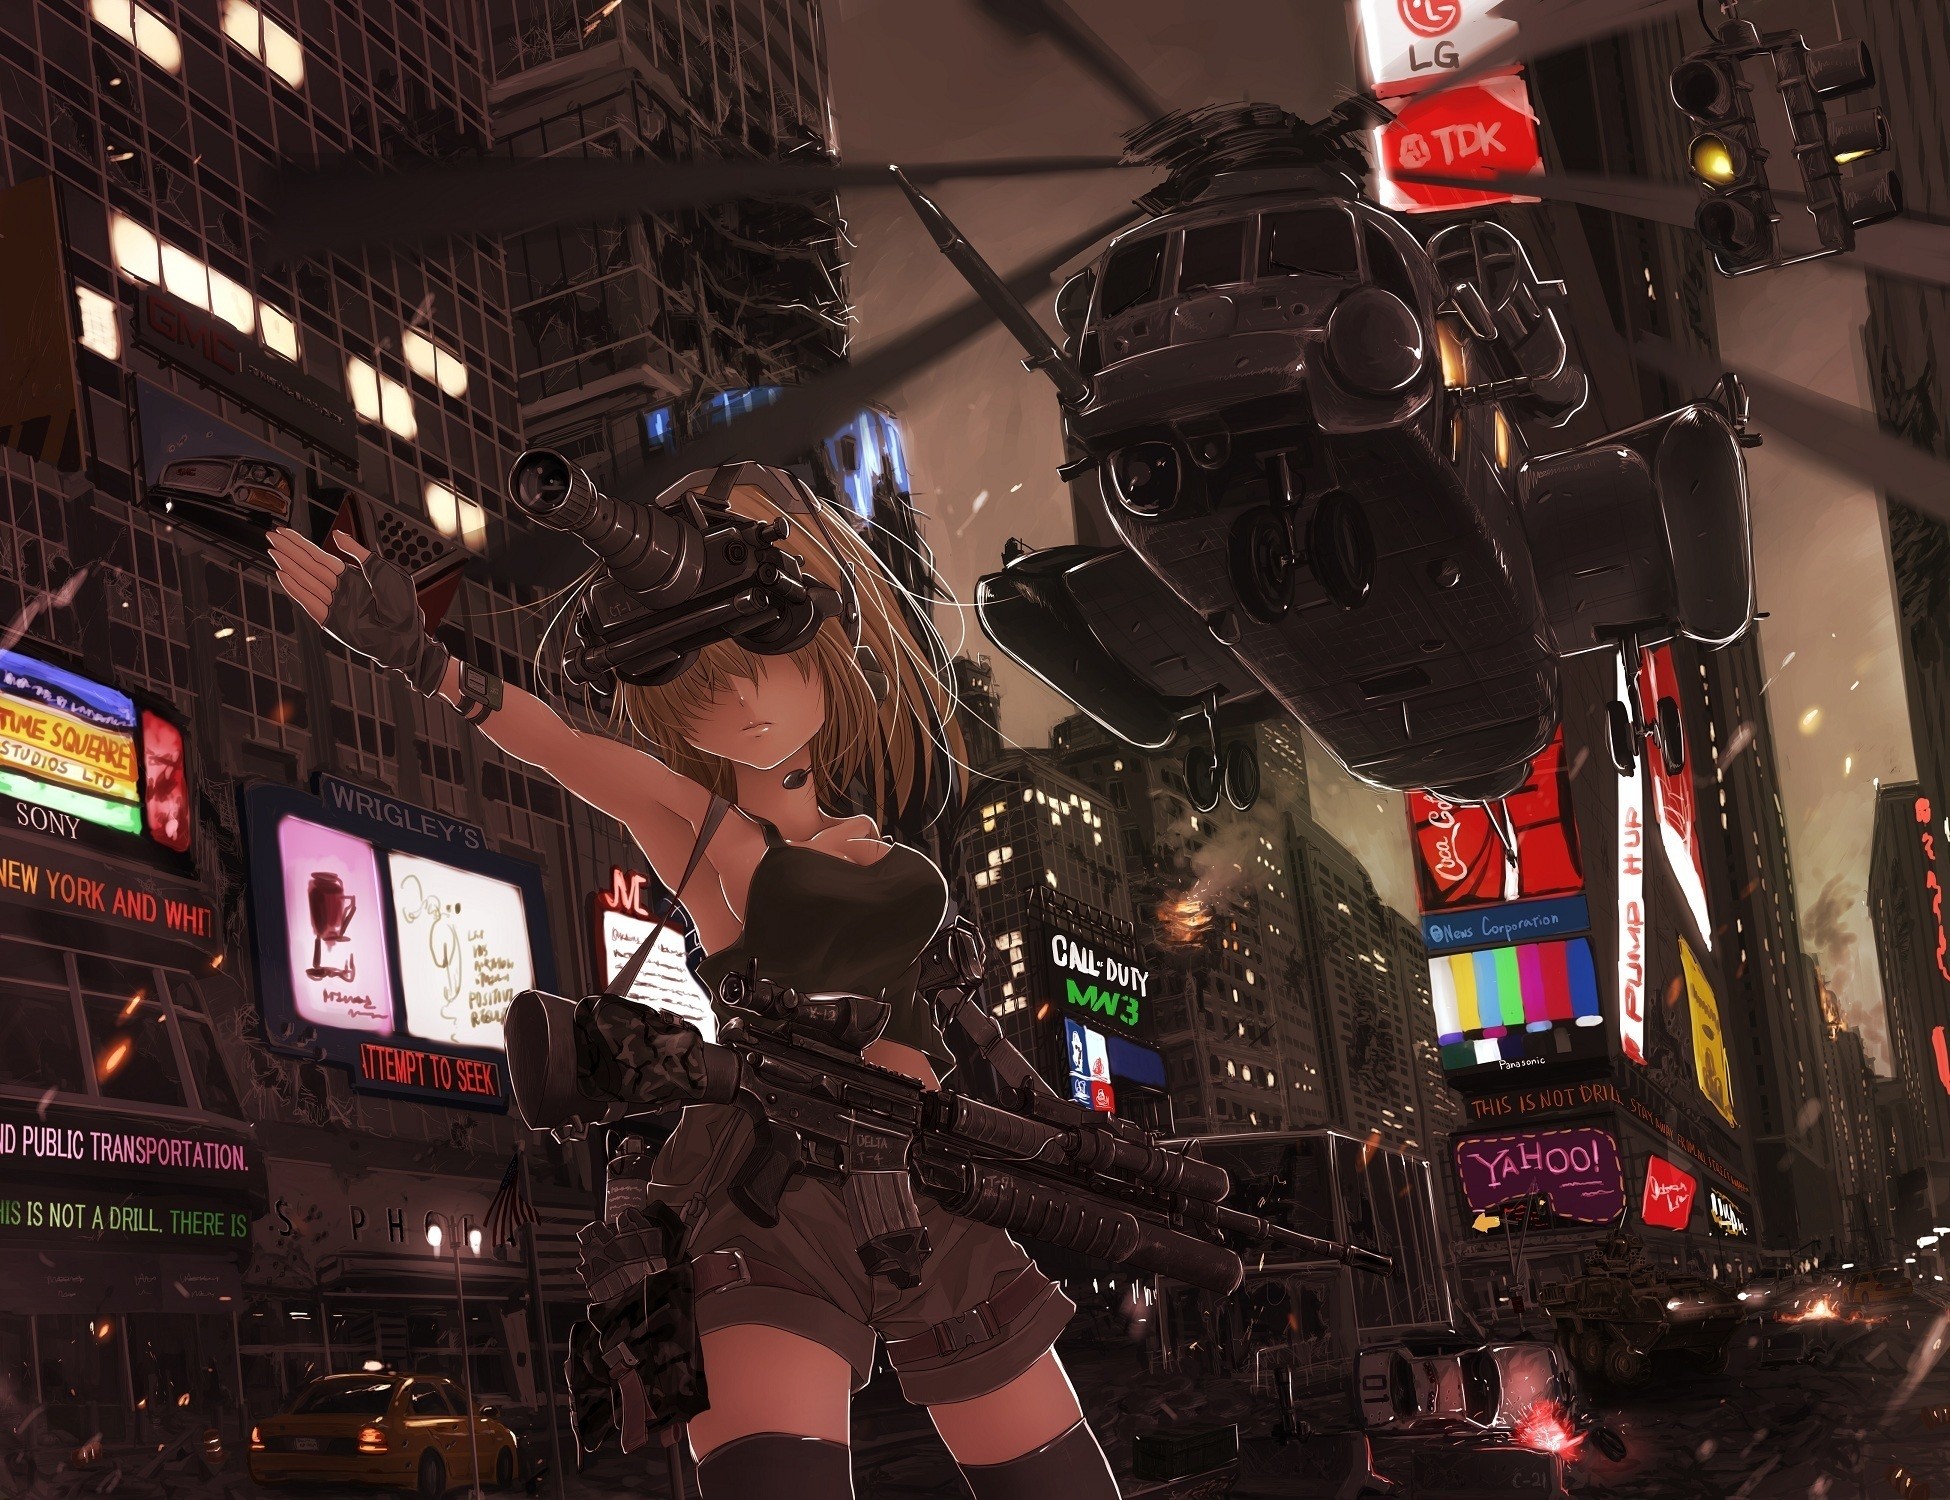 Anime 1950x1500 artwork anime girls helicopters night vision goggles rifles traffic lights Sony Coca-Cola ruins taxi Call of Duty blonde thigh-highs shorts headsets tank original characters girls with guns vehicle boobs standing weapon